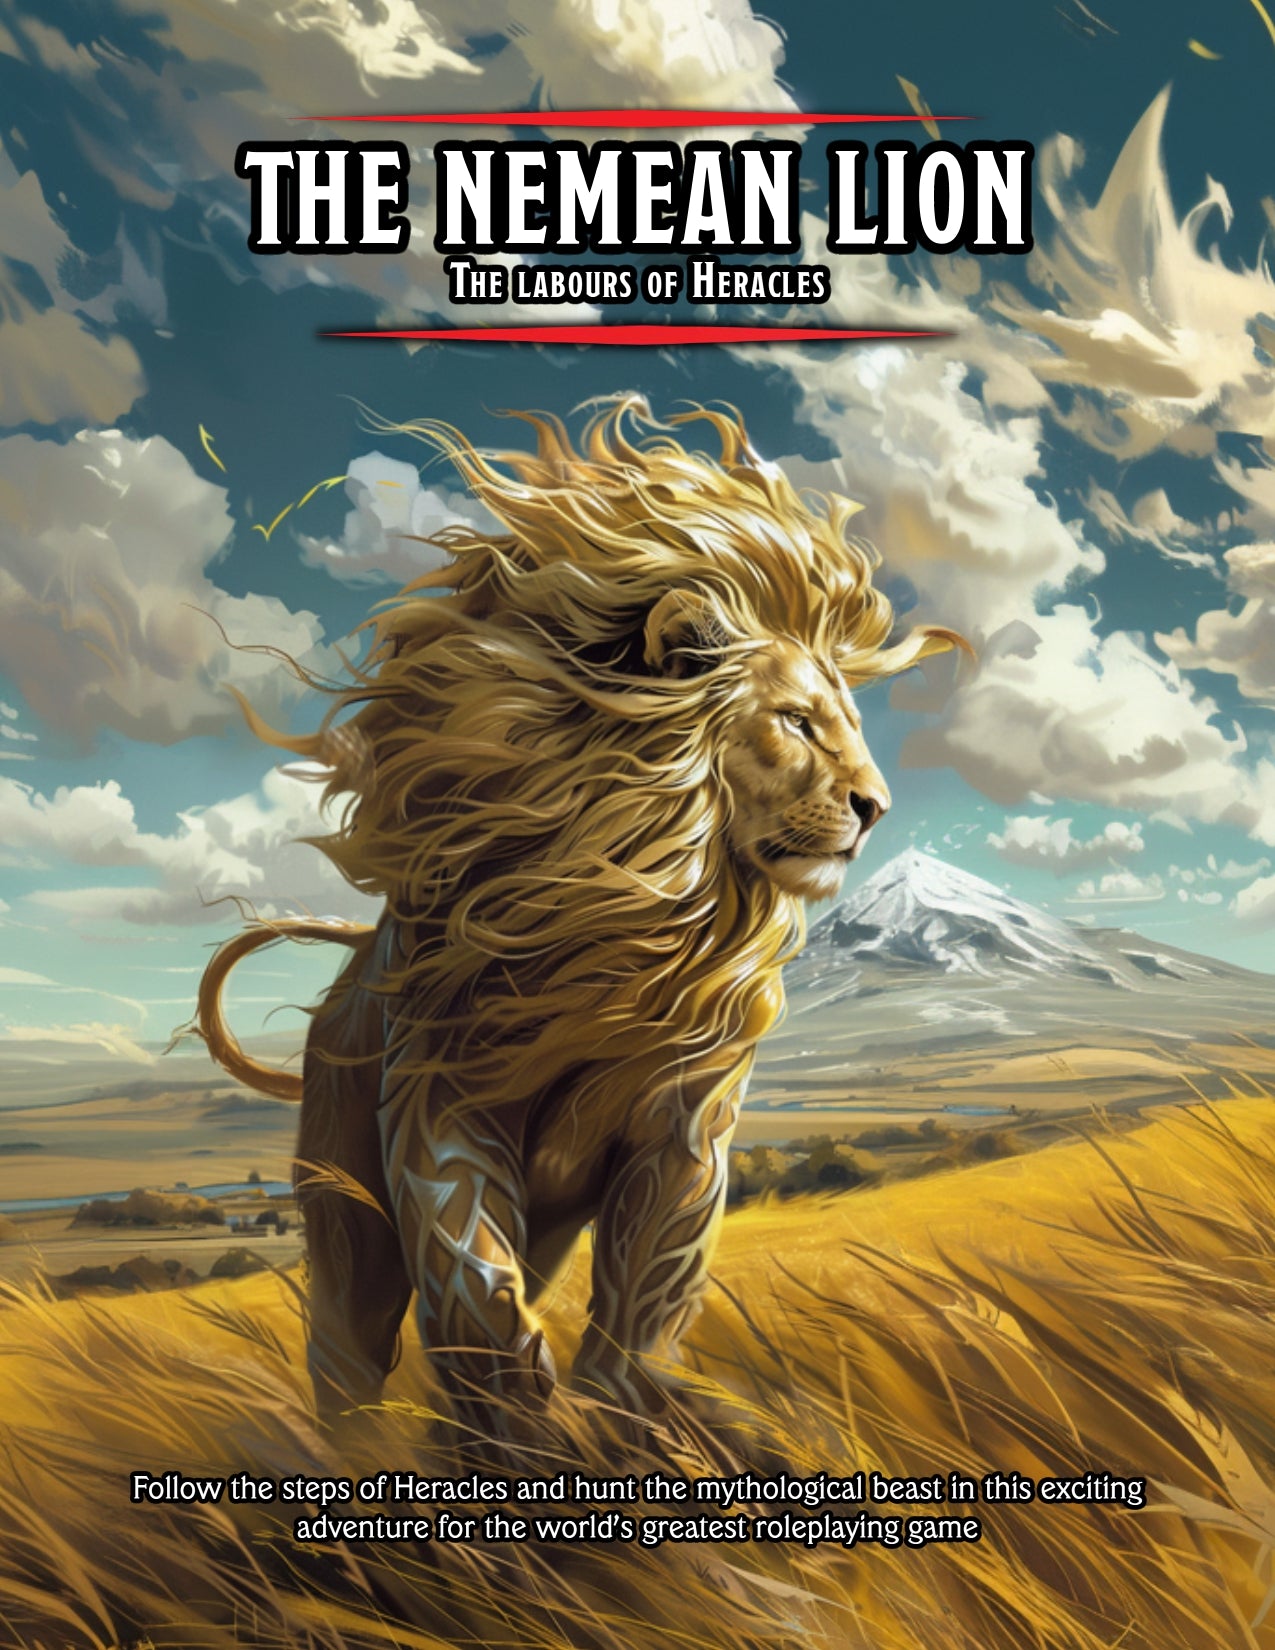 The cover of a short adventure featuring the Nemean Lion from the Labours of Heracles